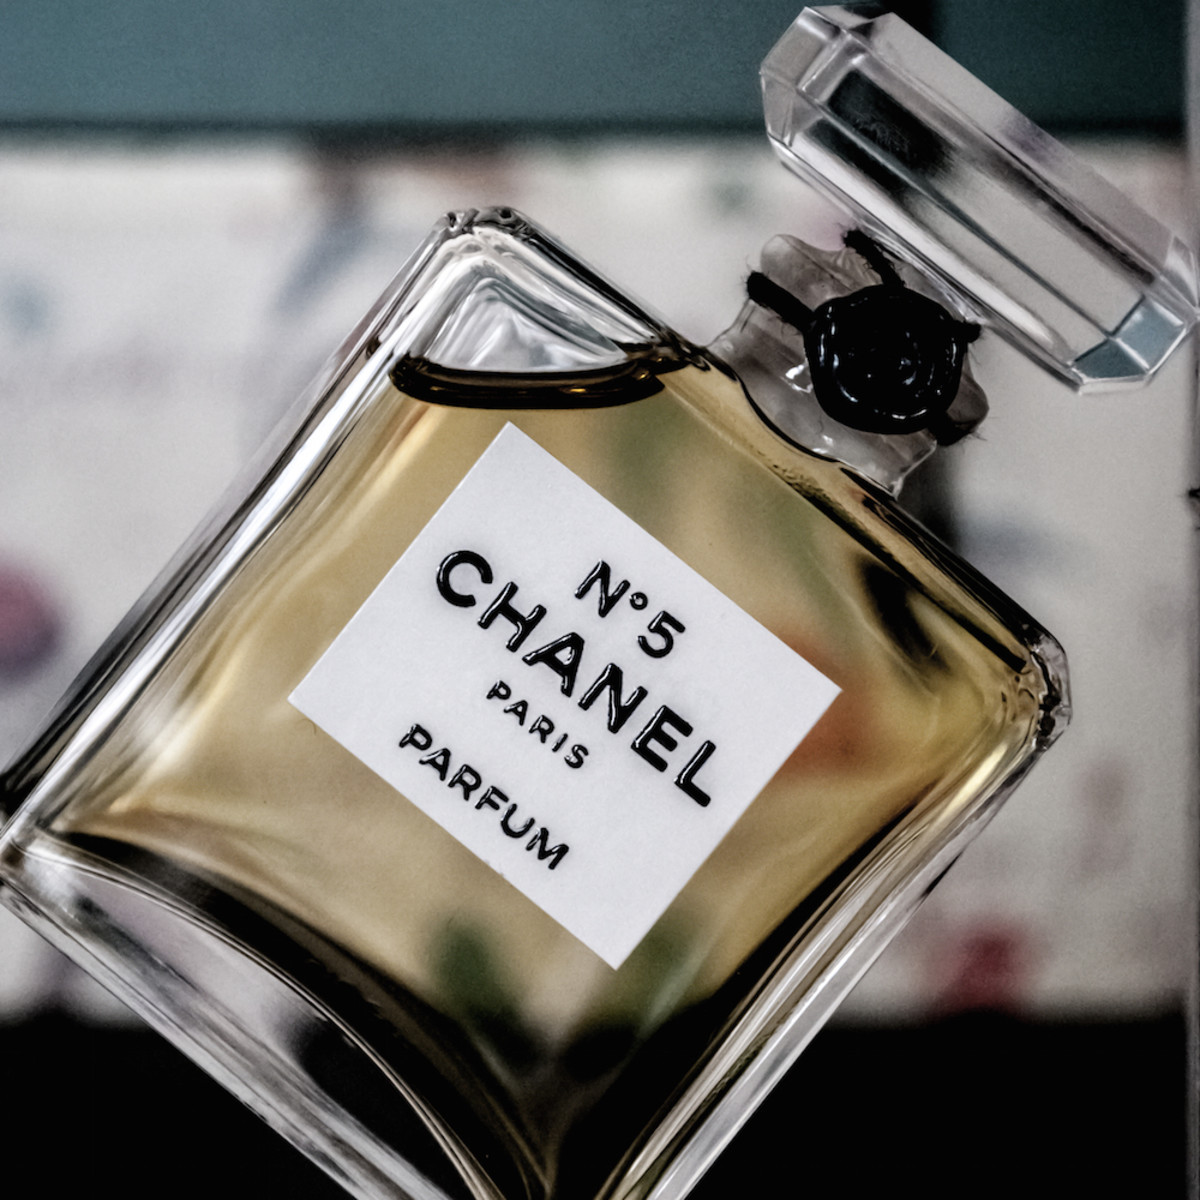 Why Is Chanel No5 The World's Favourite Perfume? HubPages